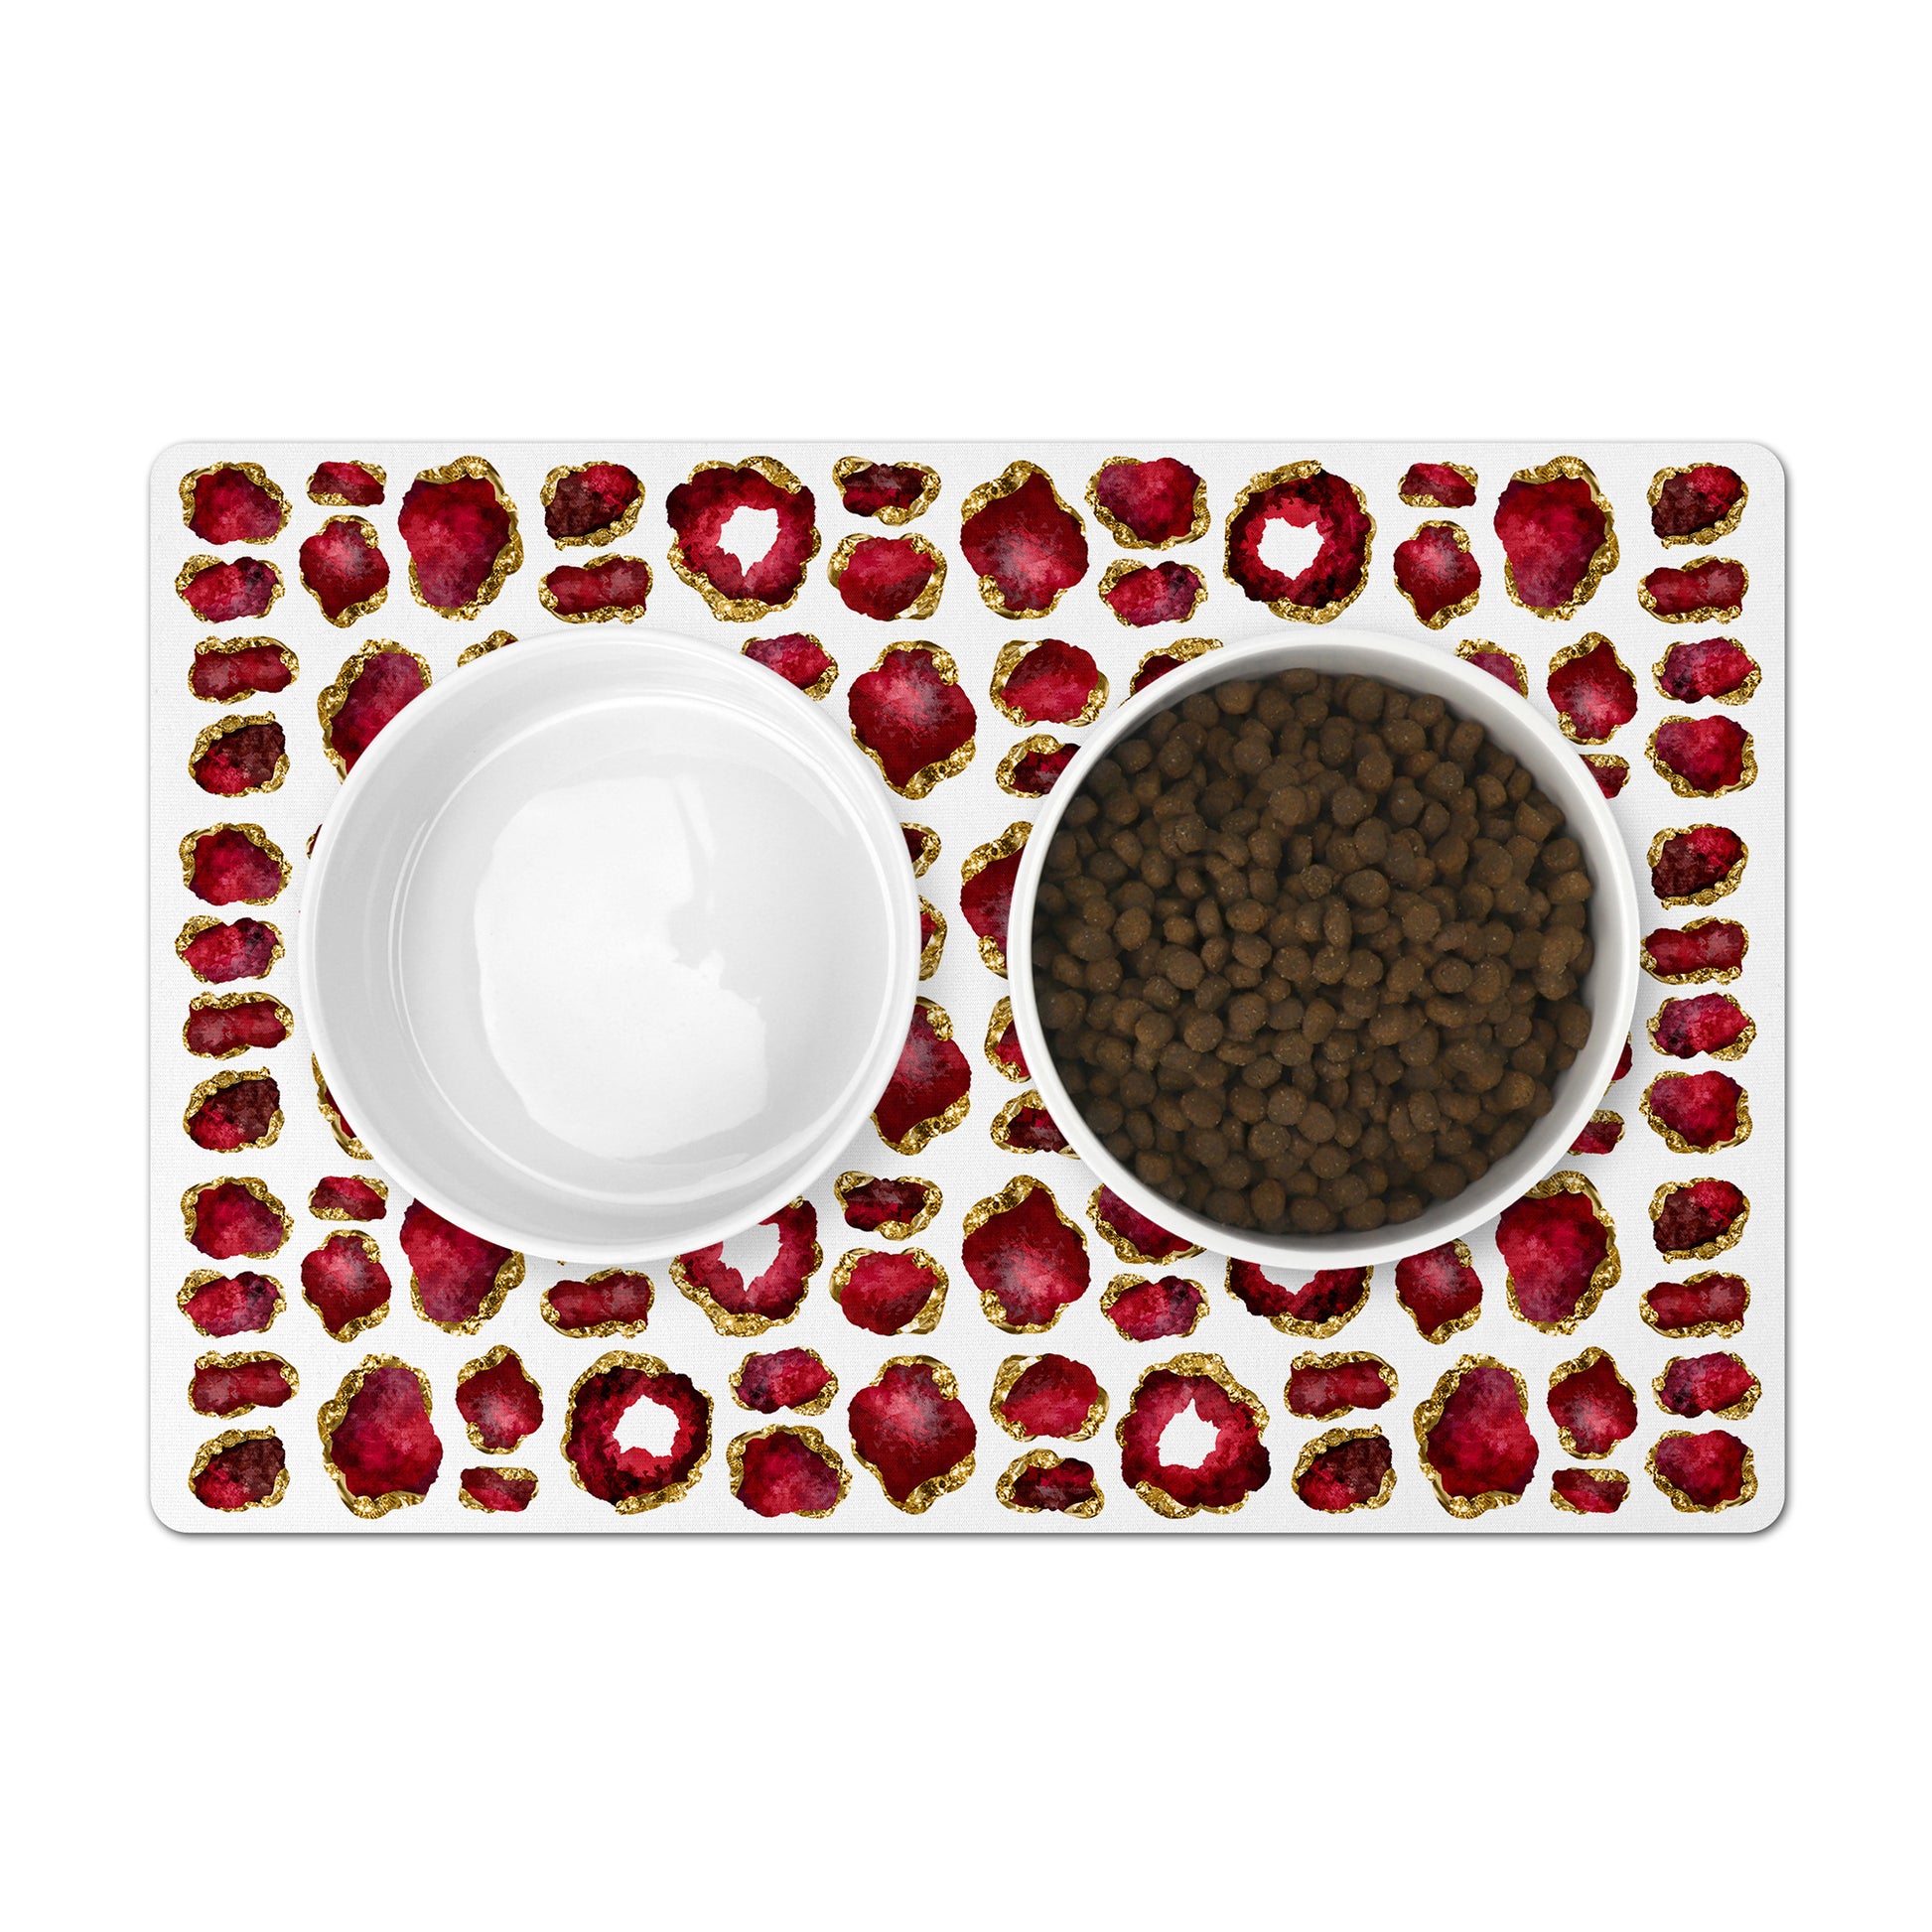 Jewel print pet food mat for your dog or cat bowls. Gorgeous ruby red and gold placemat is machine washable and has a nonskid rubber back.